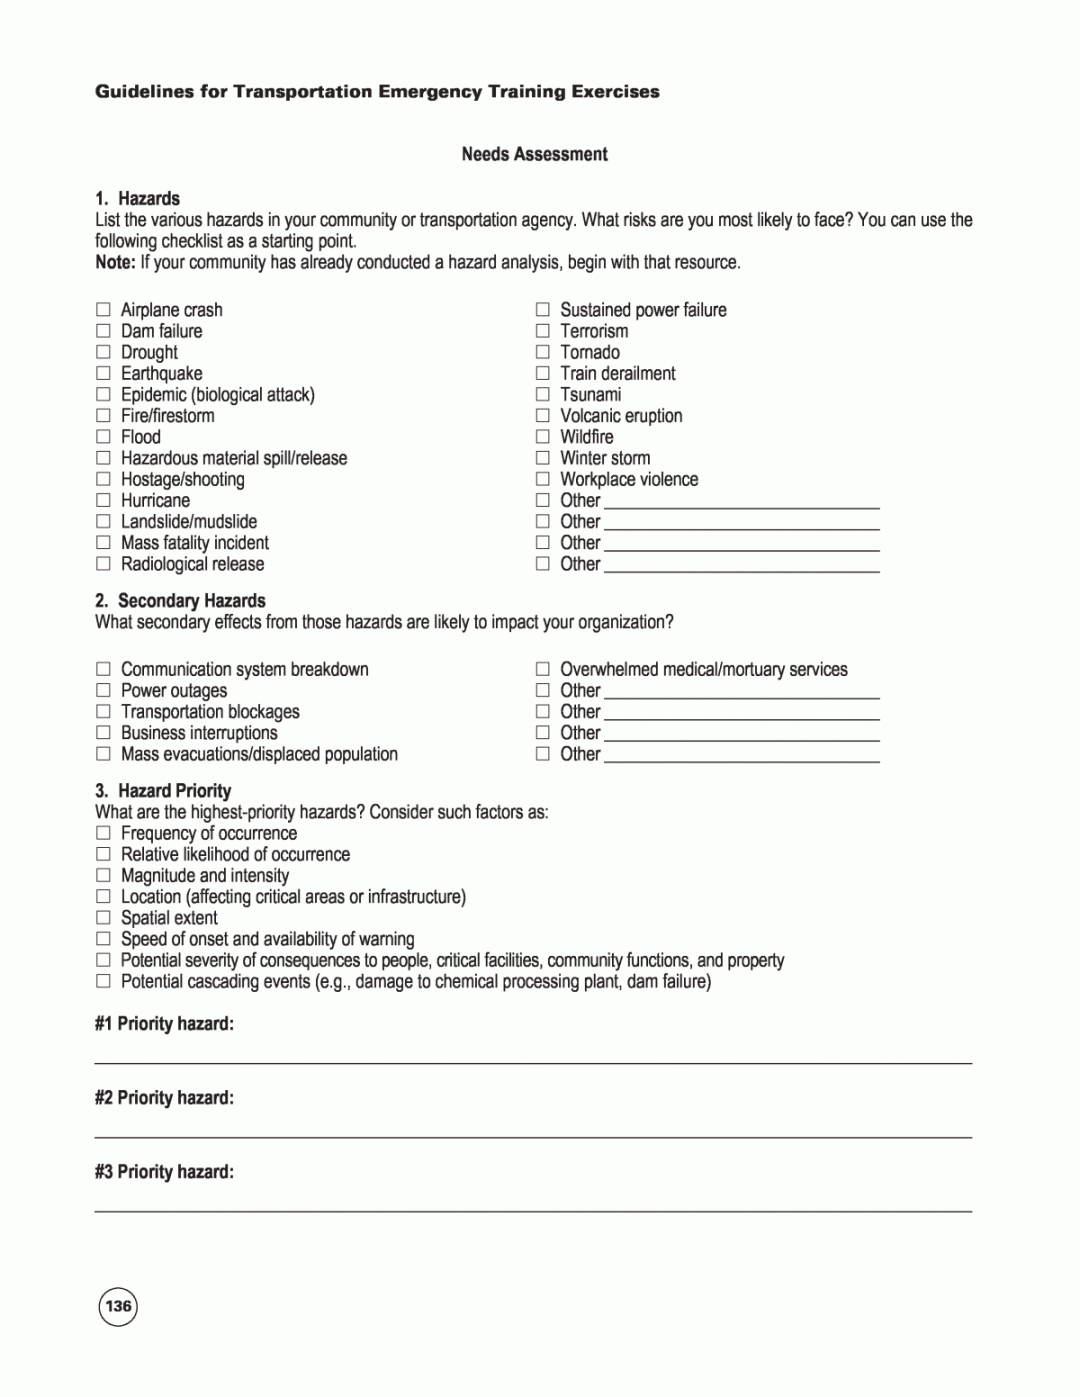 attachment 3 needs assessment template  guidelines for information needs analysis template sample